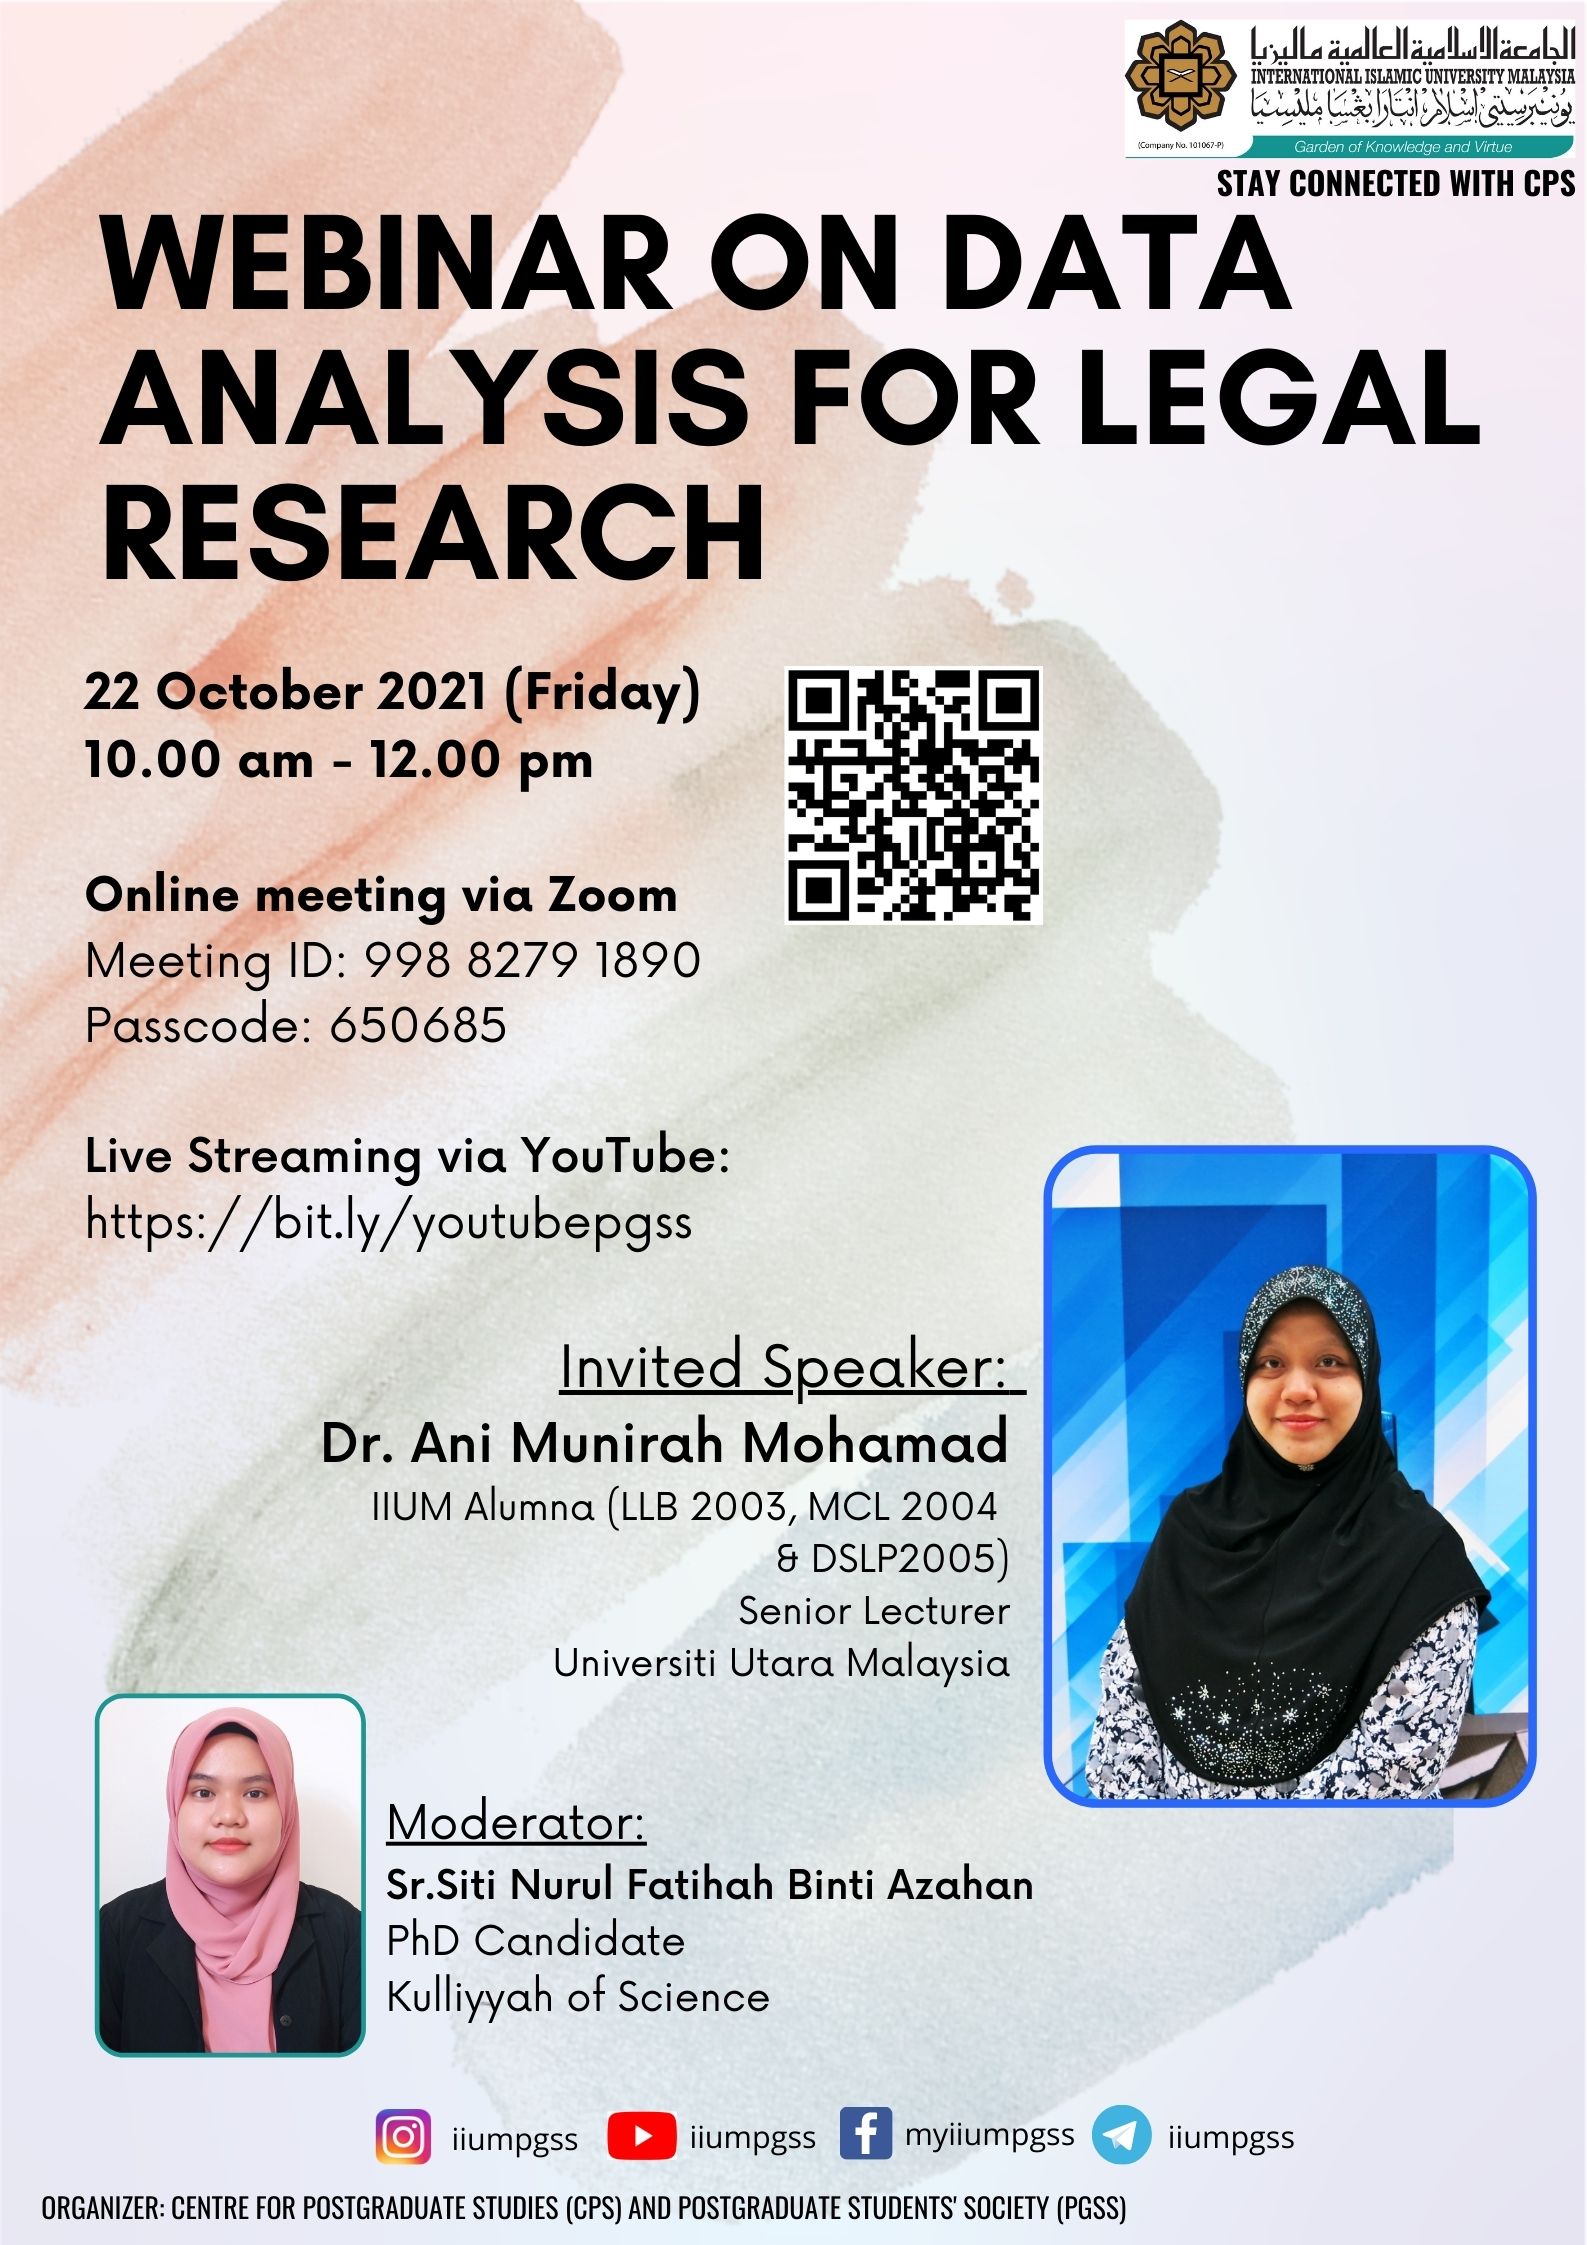 INVITATION TO ATTEND WEBINAR ON DATA  ANALYSIS FOR LEGAL RESEARCH